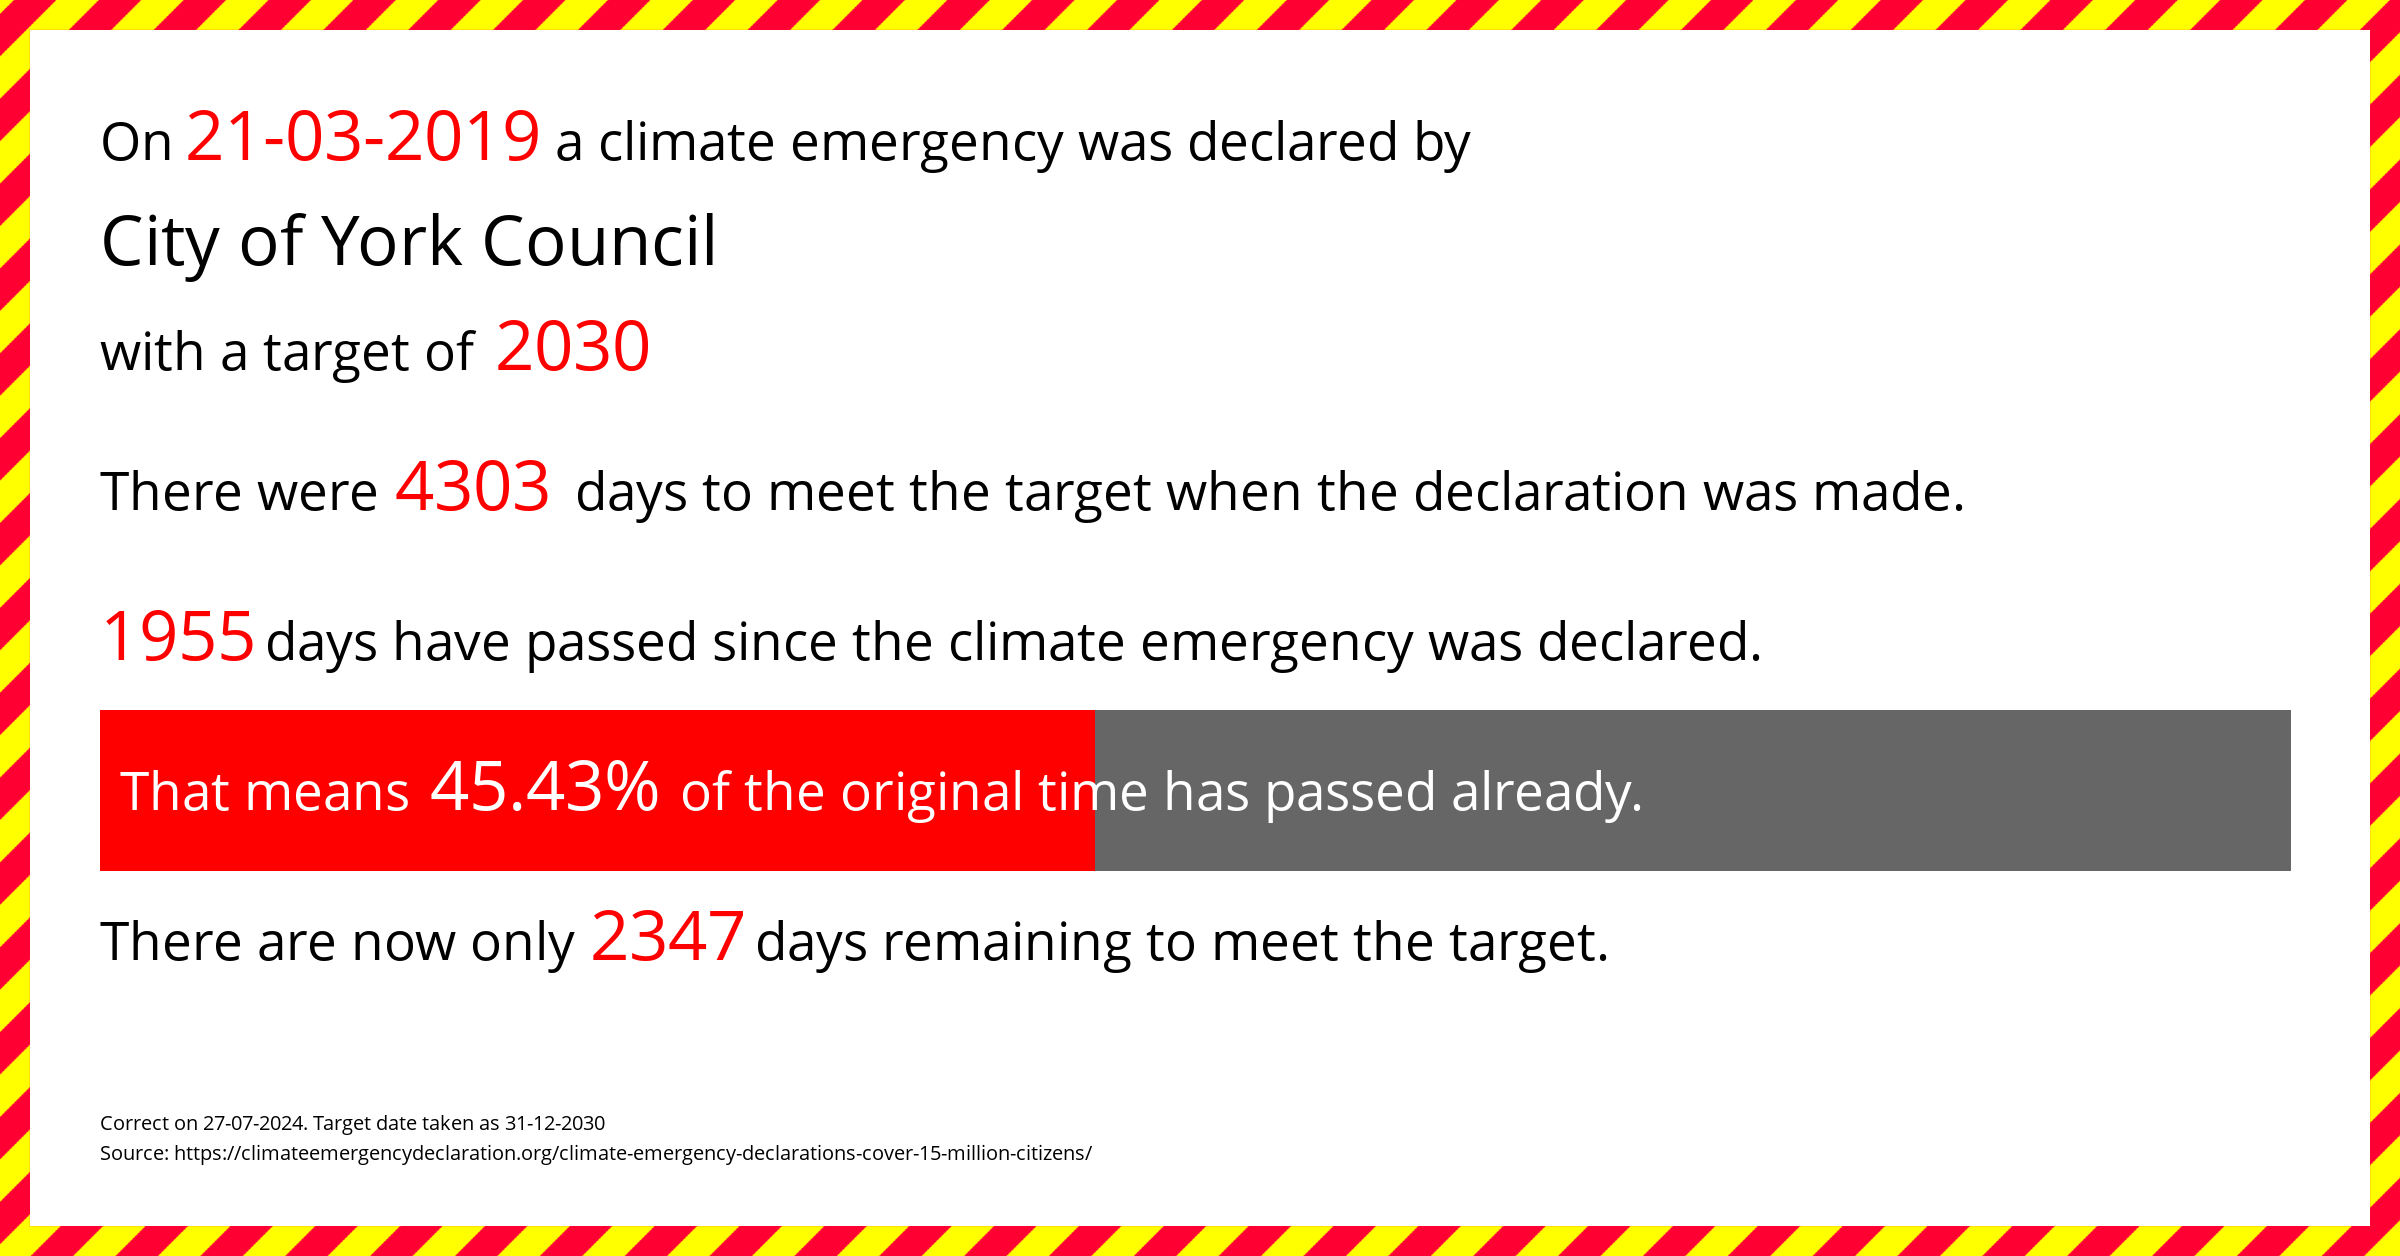 City of York Council declared a Climate emergency on Thursday 21st March 2019, with a target of 2030.